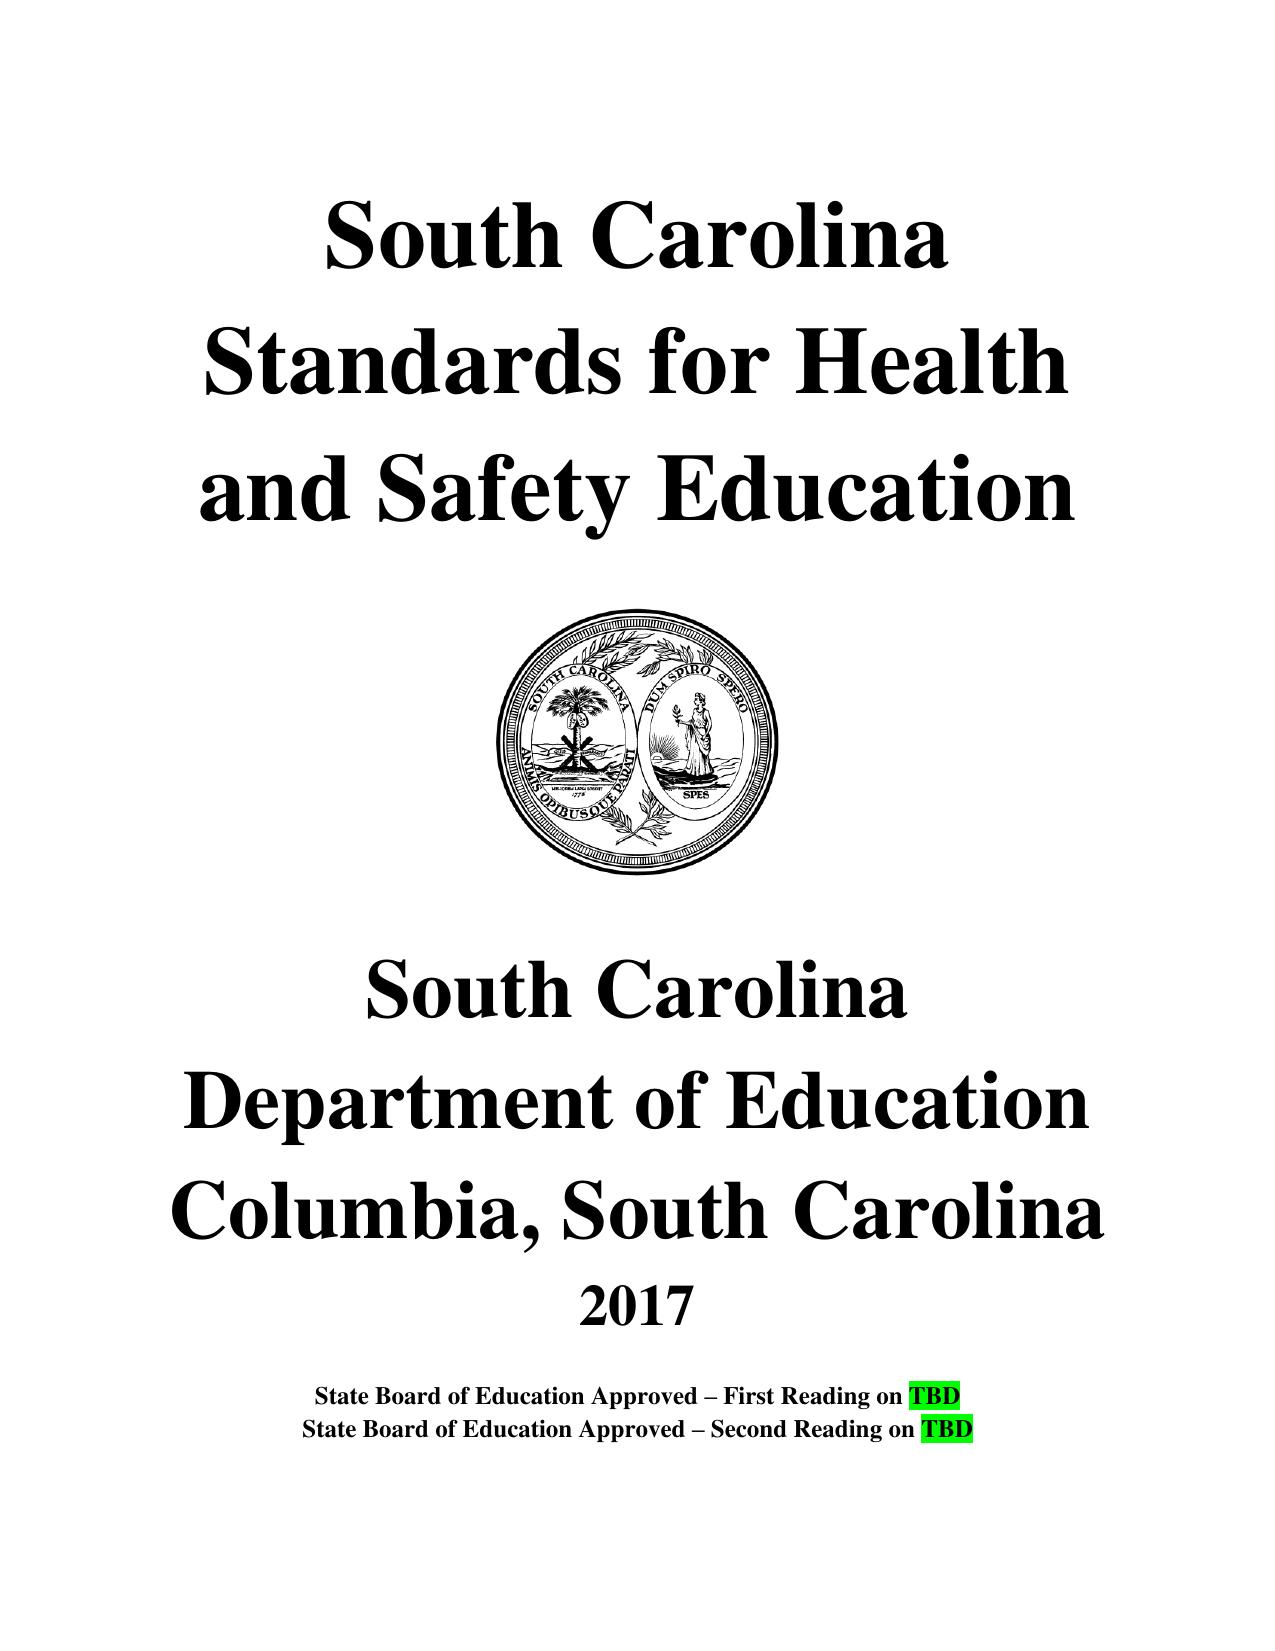 South Carolina Standards for Health and Safety Education 2016